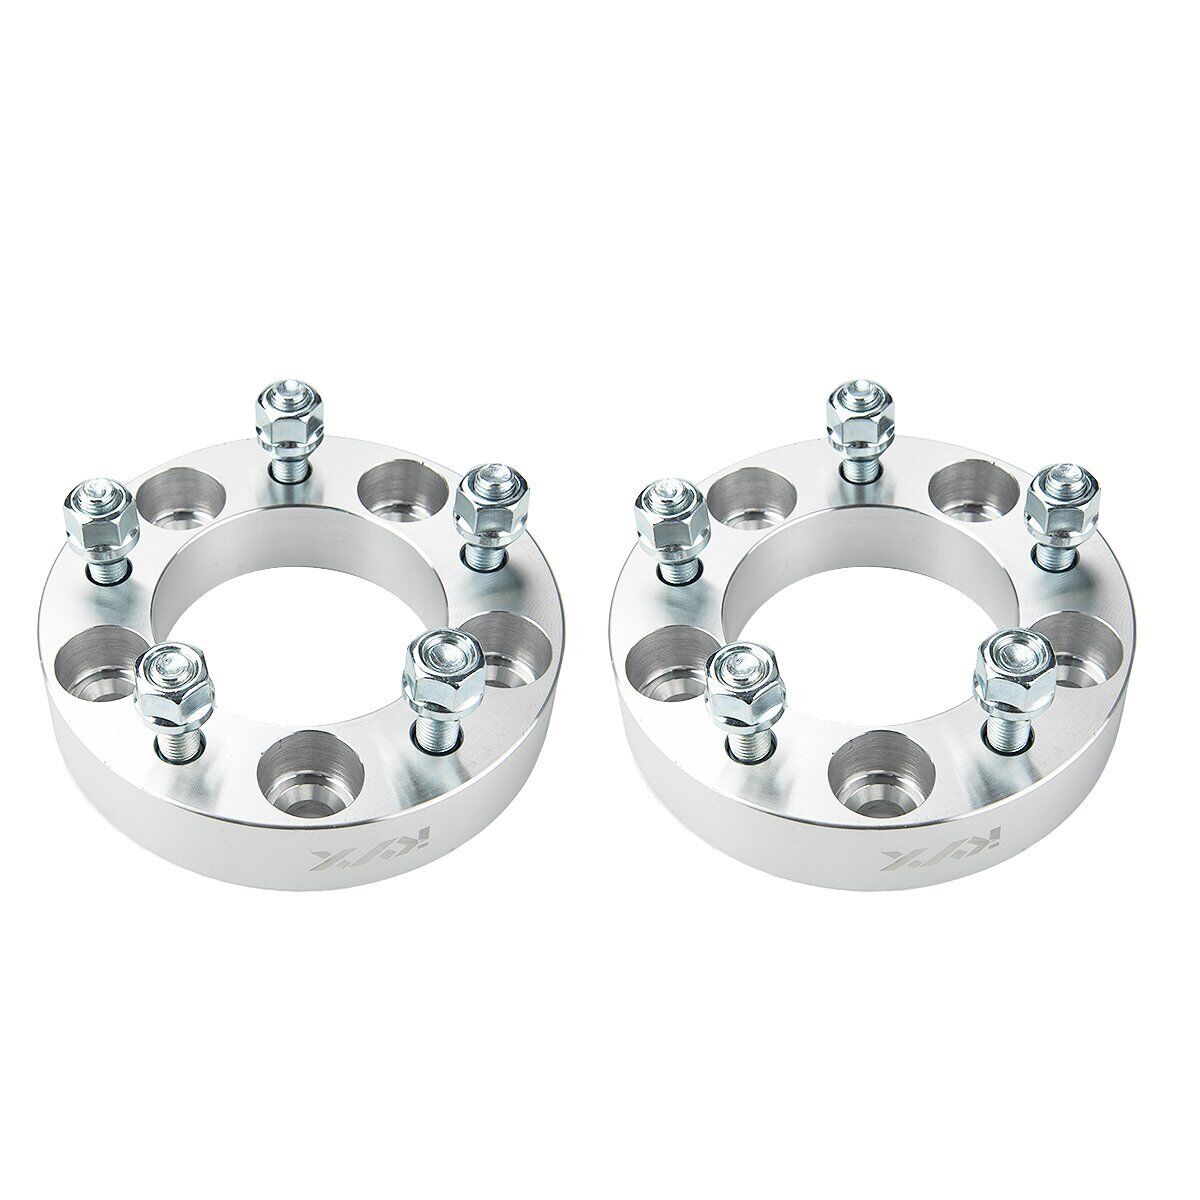 2PC 1.25inch -5x4.75 Wheel Spacers 12x1.5-87.1 FOR 04-2009 Cadillac XLR-V Buick